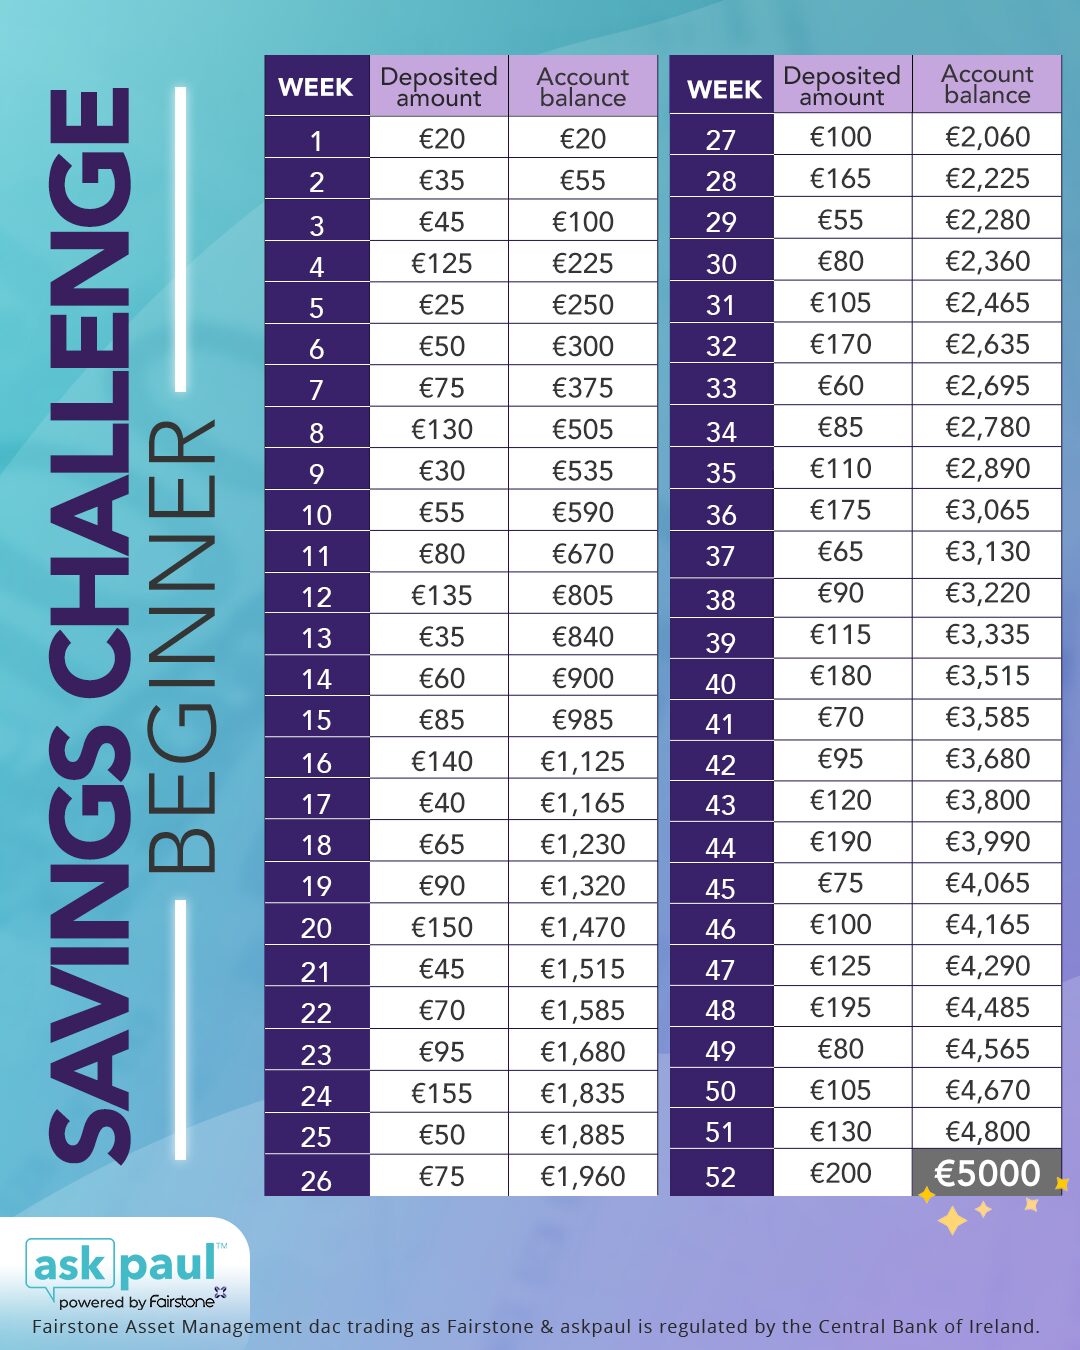 Starting Your Year Right: 52 Week Savings Challenge